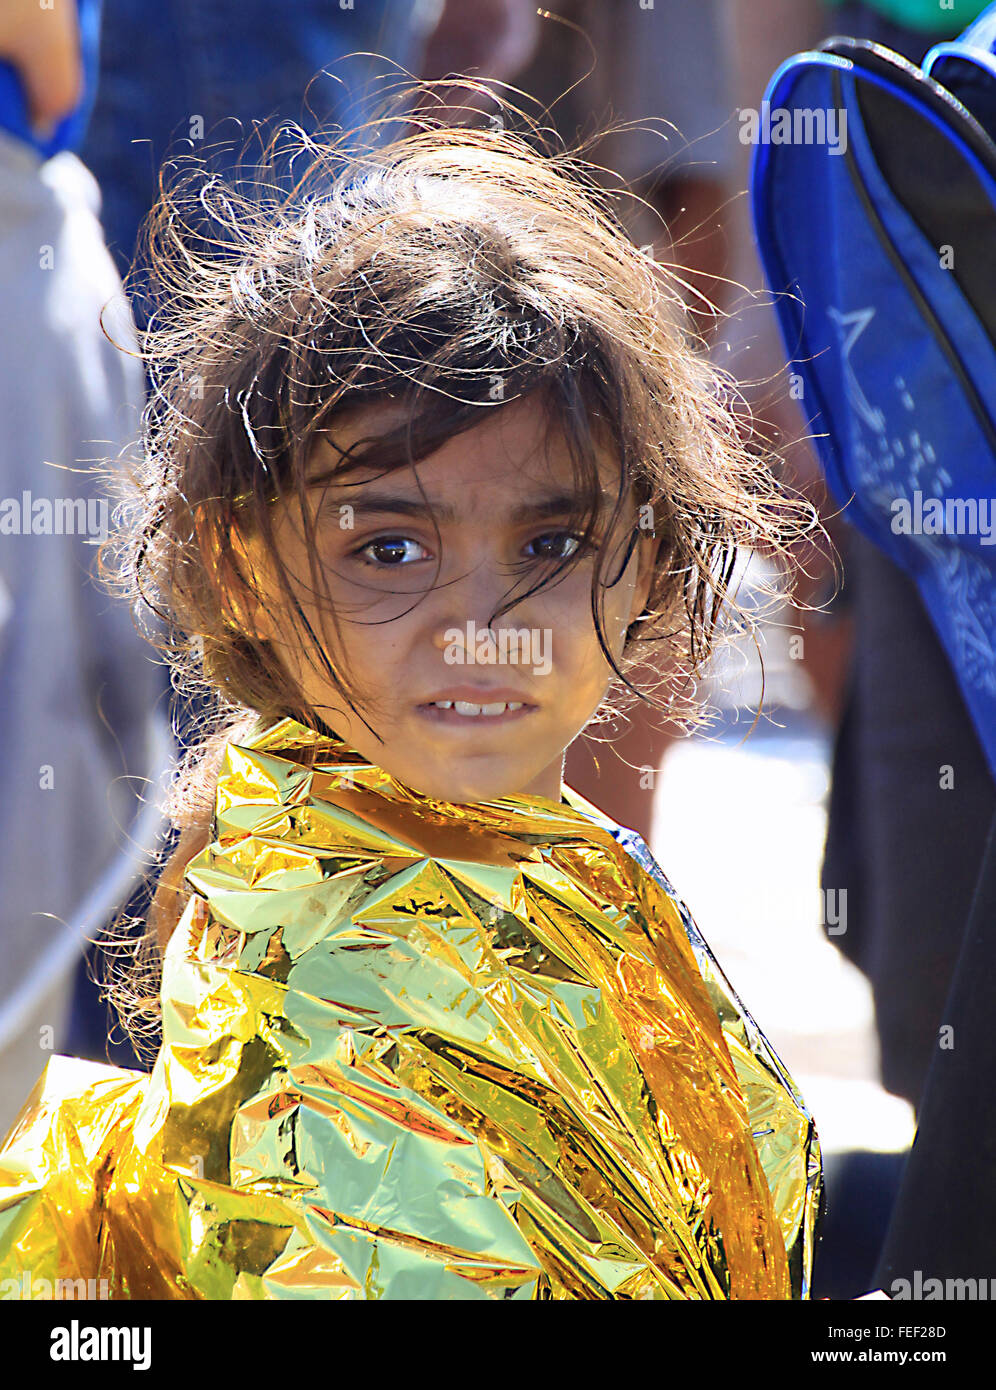 Young Syrian girl refugees refugee wrapped in a survival blanket after ...